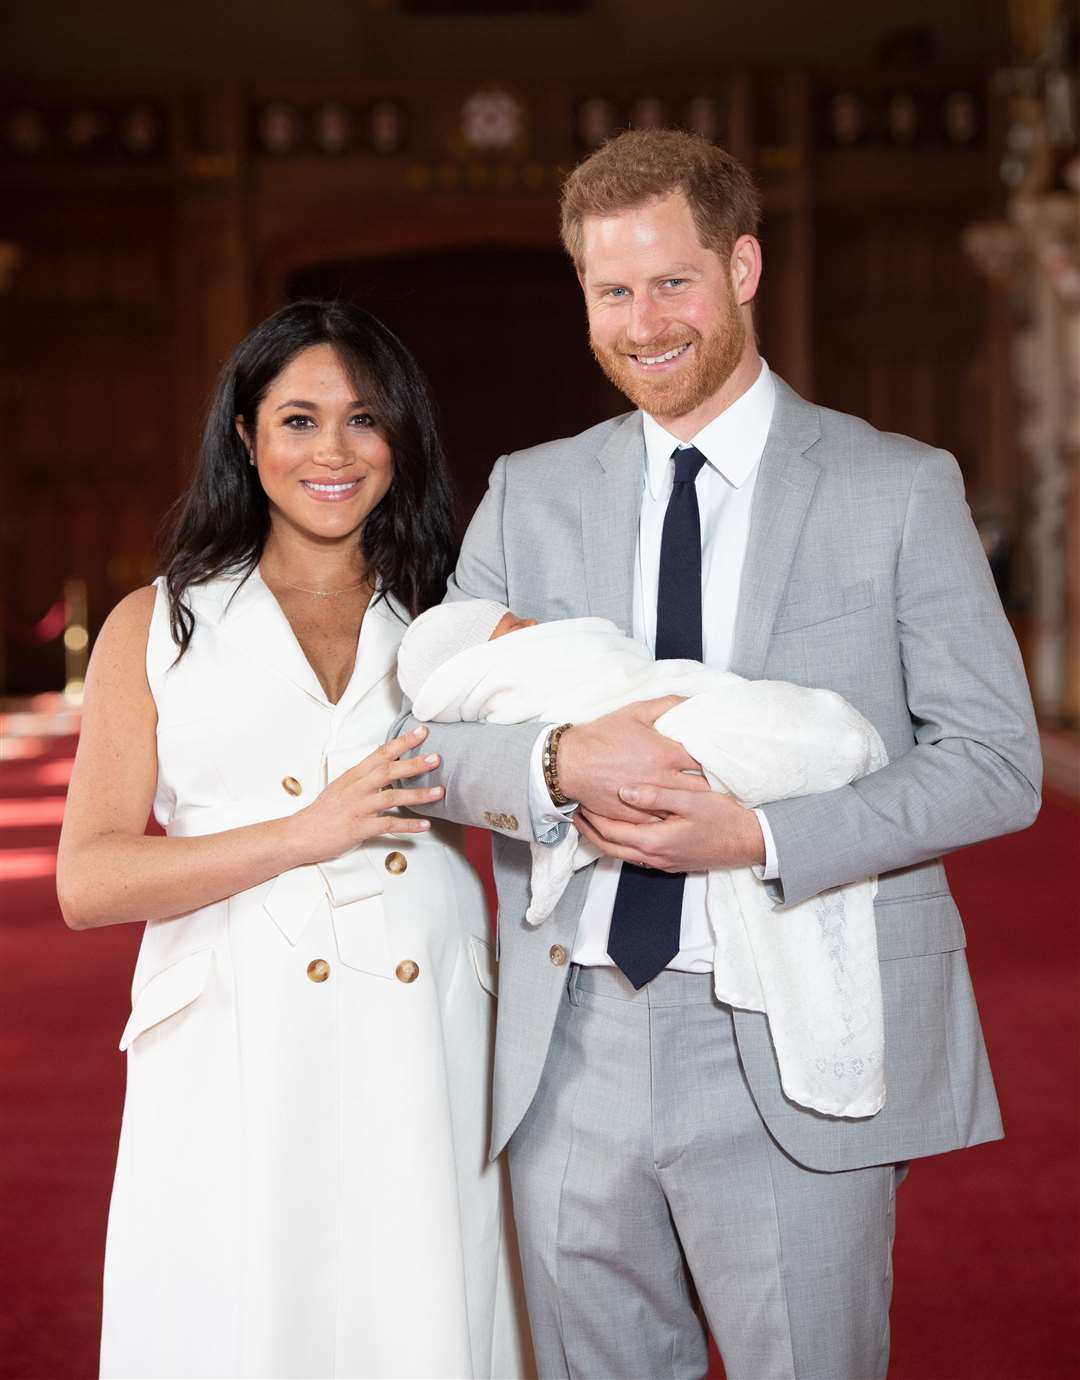 The Duke and Duchess of Sussex with their baby son, Archie (Dominic Lipinski/PA)